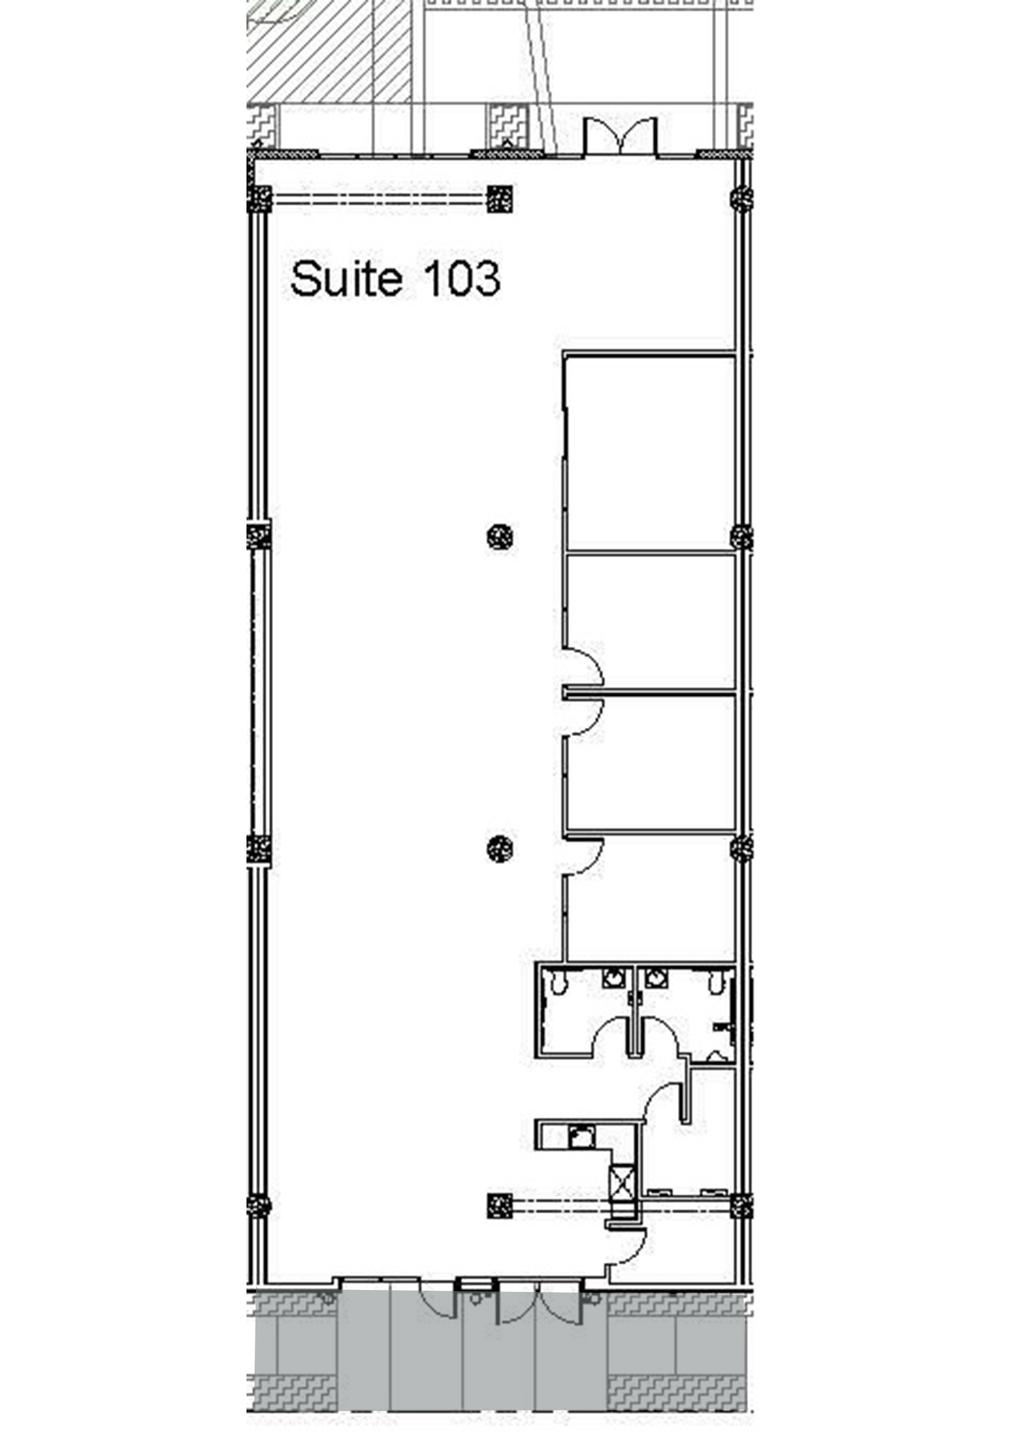 Building 1 Suite 103-4,896 rsf Building 1, Suite 103 Features Large conference room with sliding glass doors Three private offices or break-out rooms Large open area with 22 high